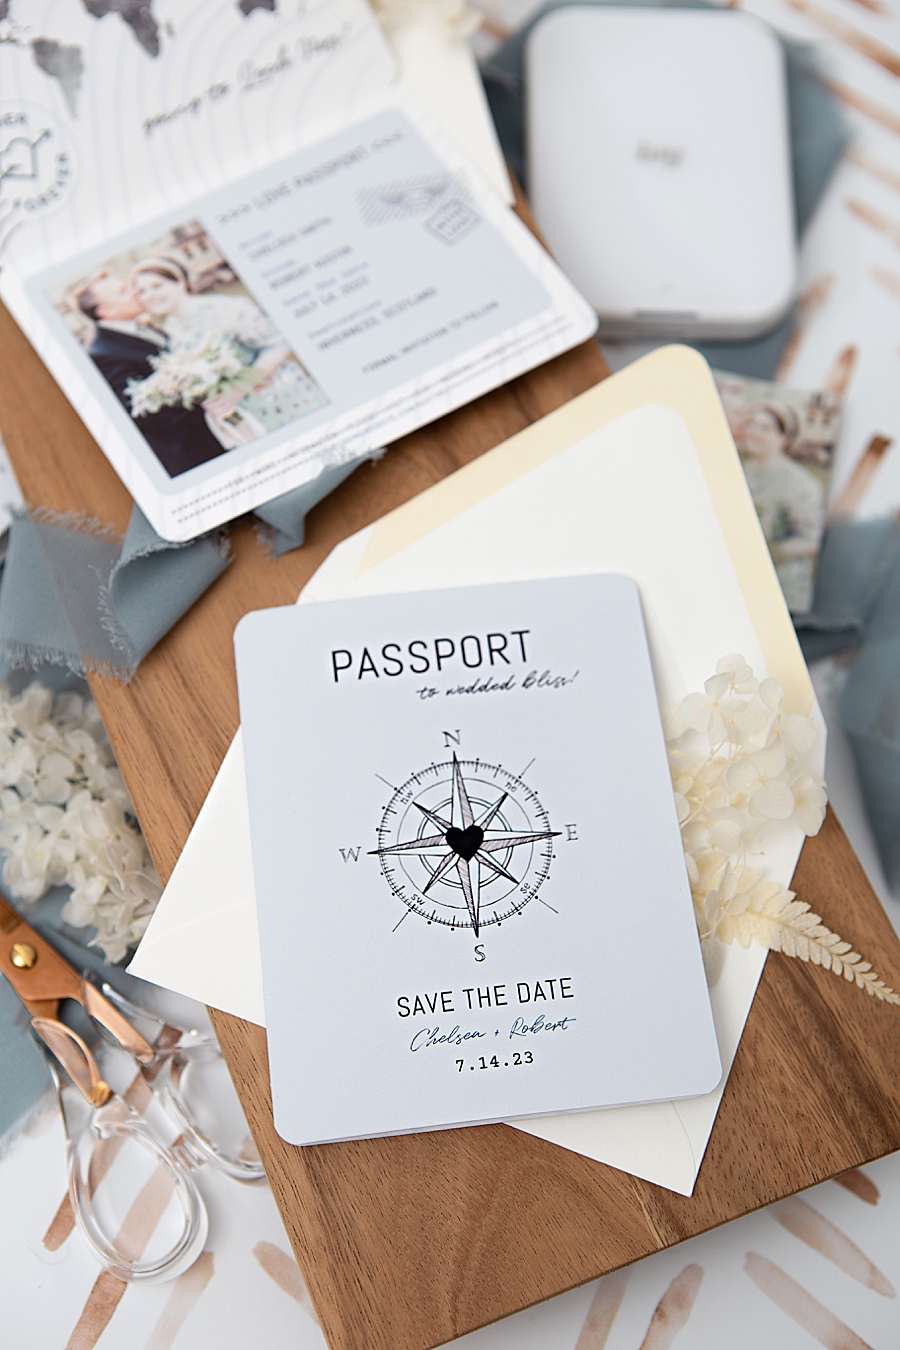 Make your own stunning passport save the date invitations!